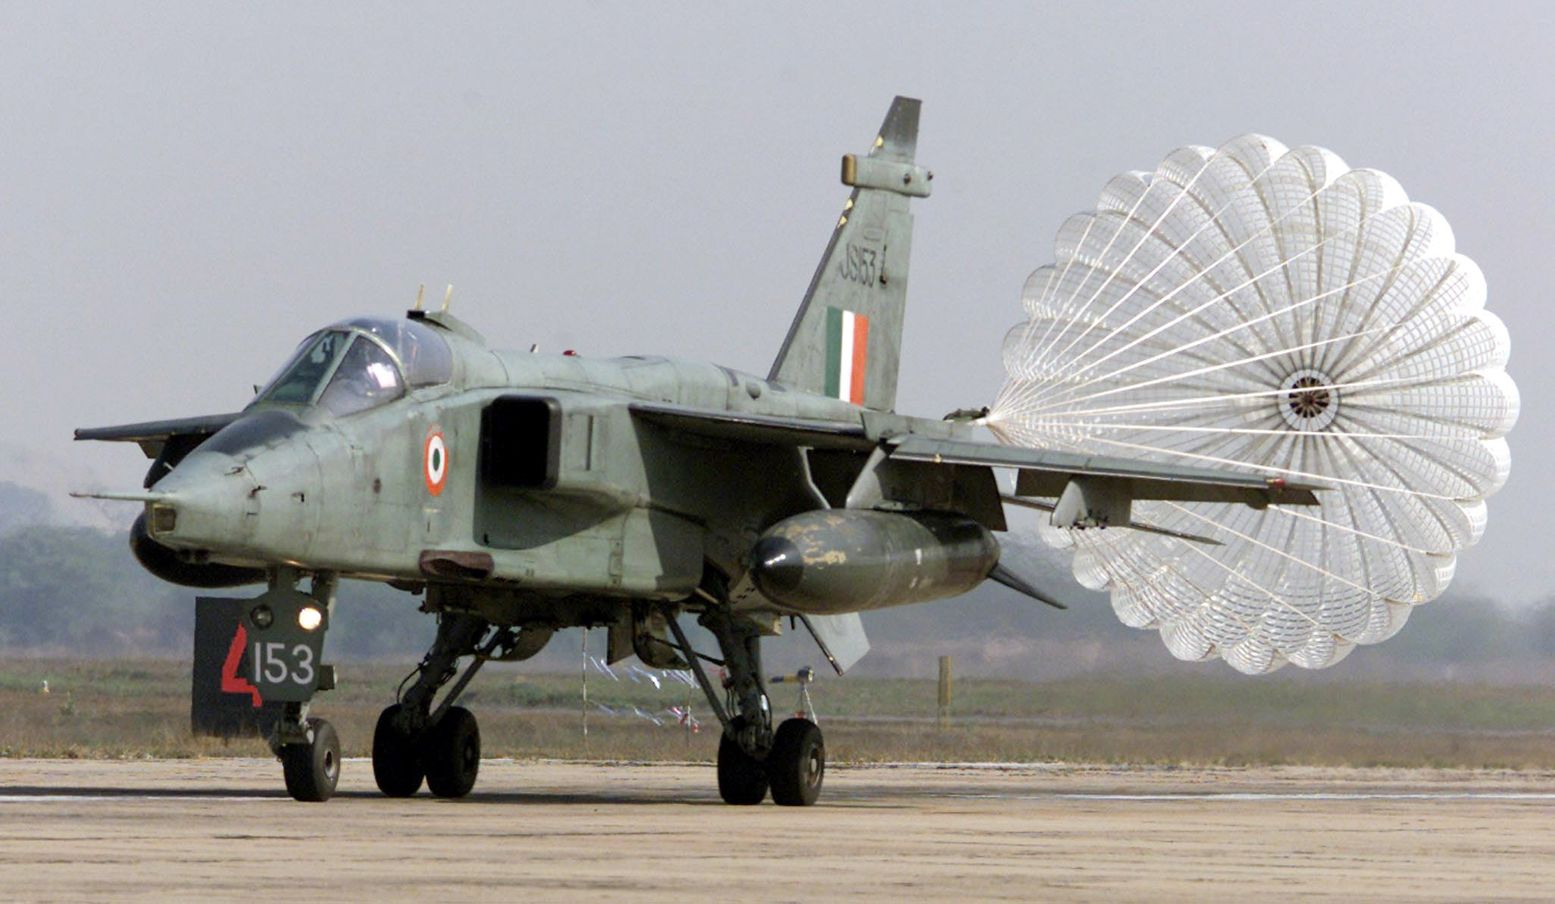 Video Shows Indian Air Force Jaguar in Serious Trouble After Suffering